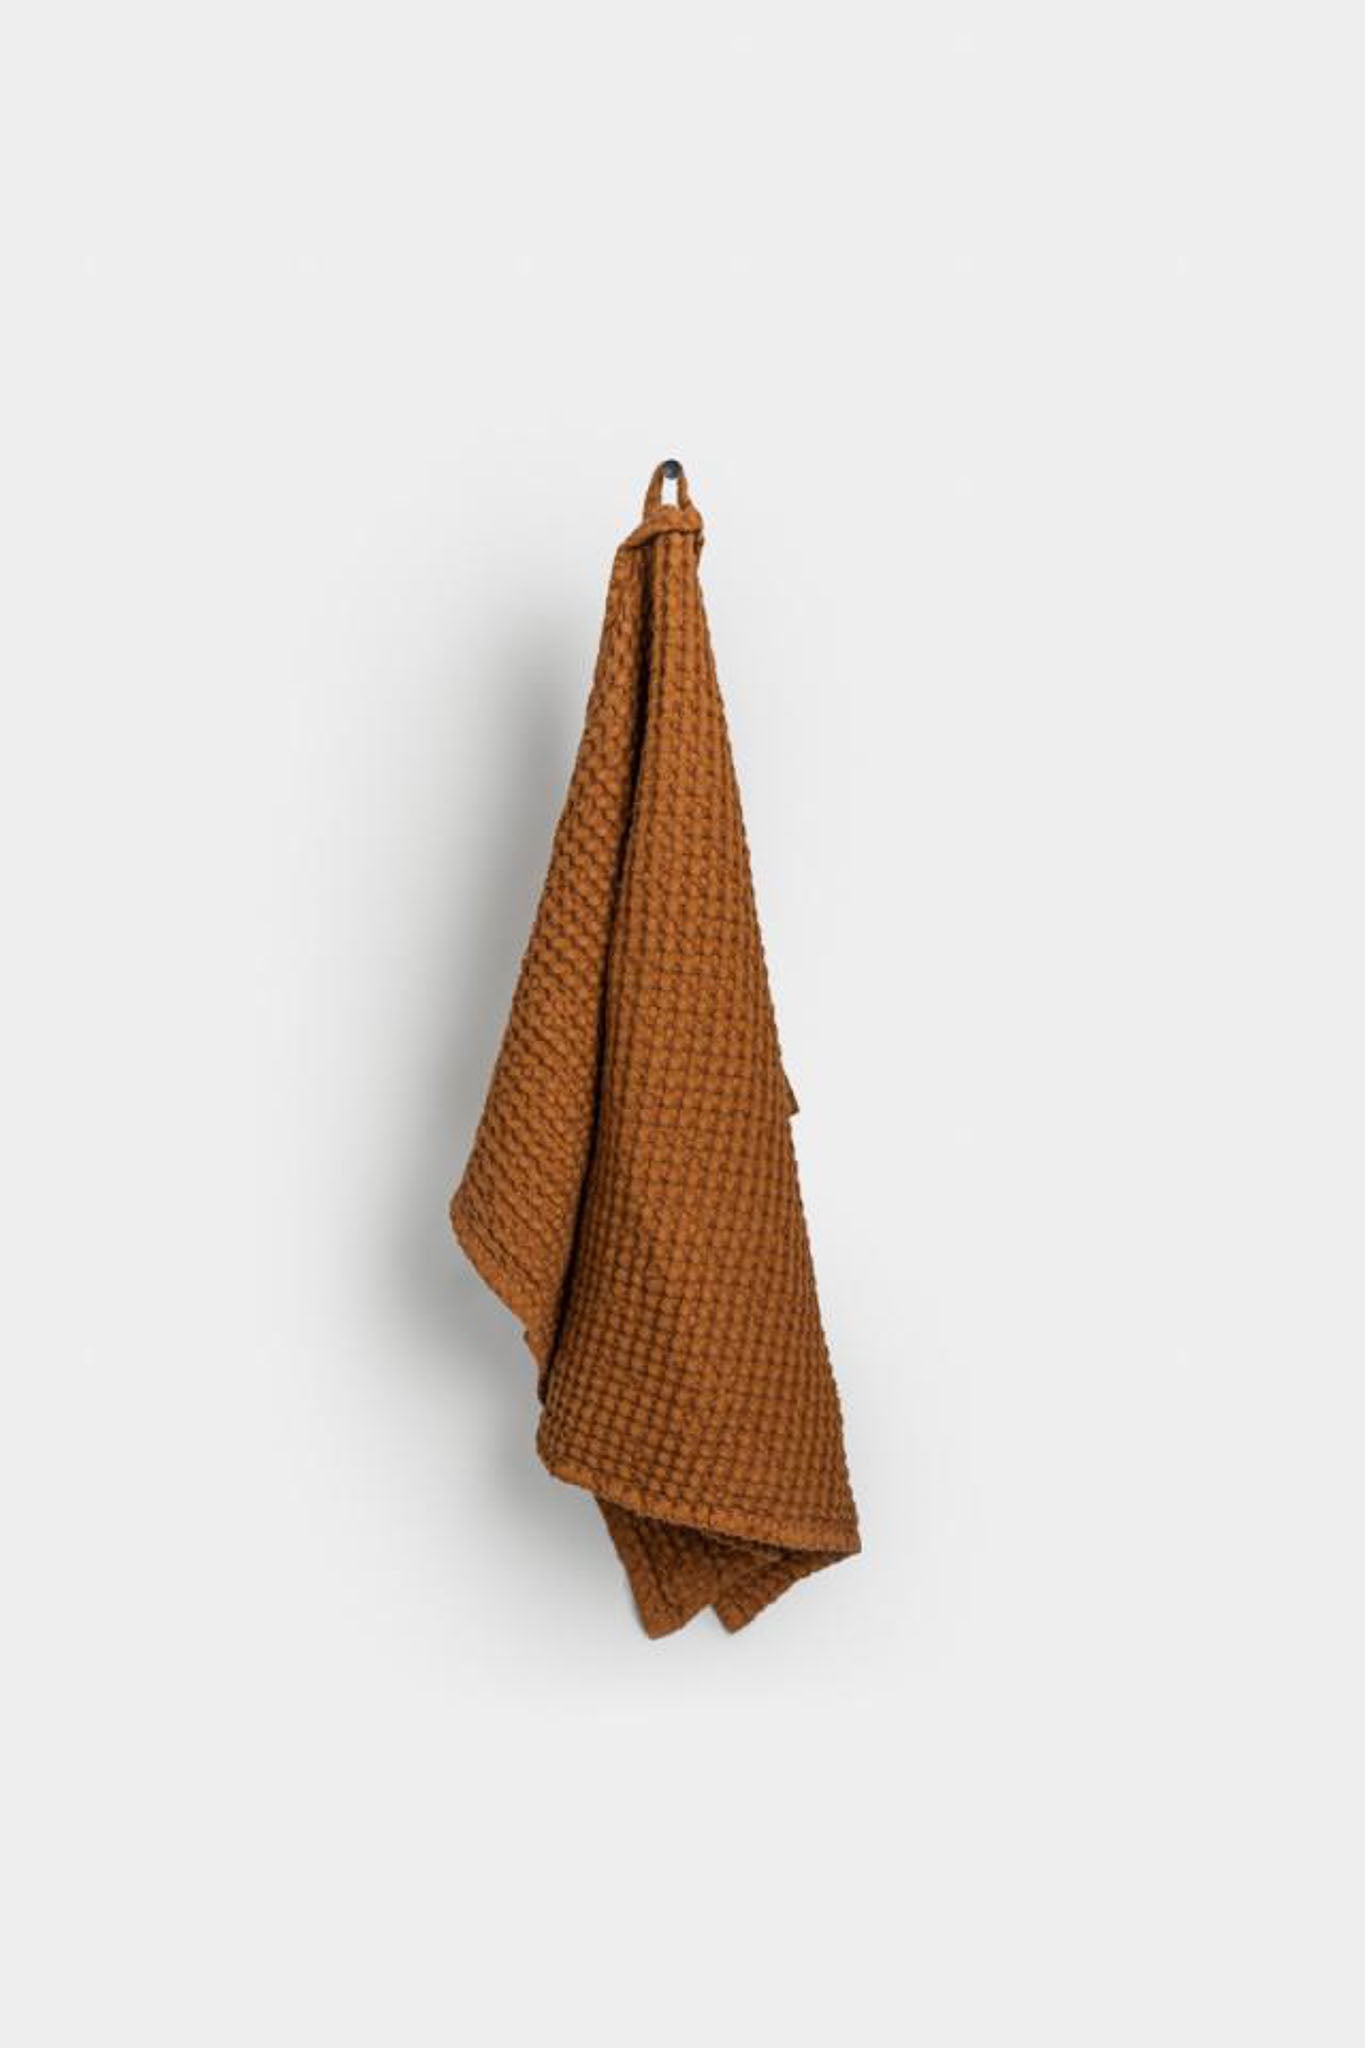 Olanly 100% Cotton Kitchen Towel Waffle Weave Check Towel